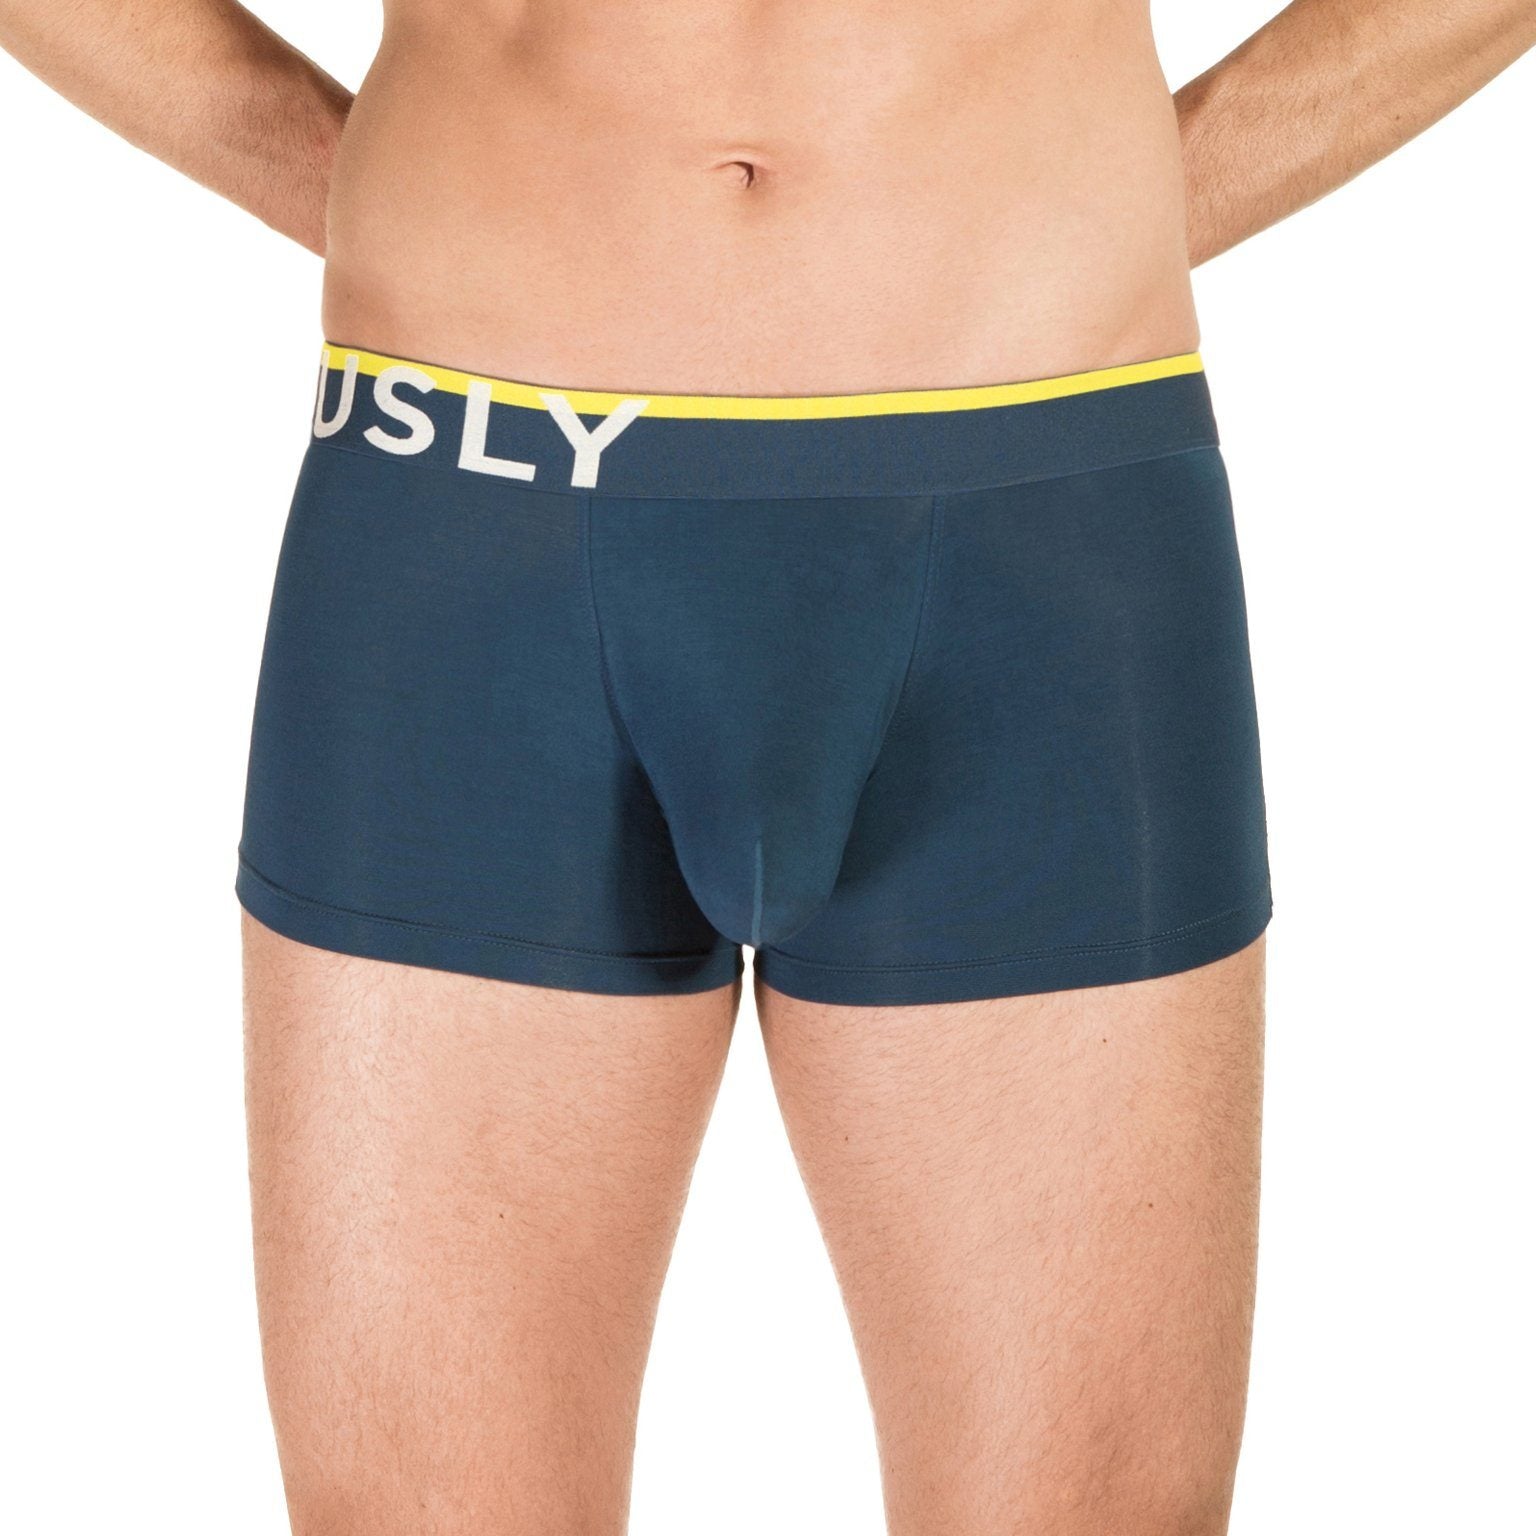 Men and Underwear on X: The EveryMan Trunks in black by Obviously